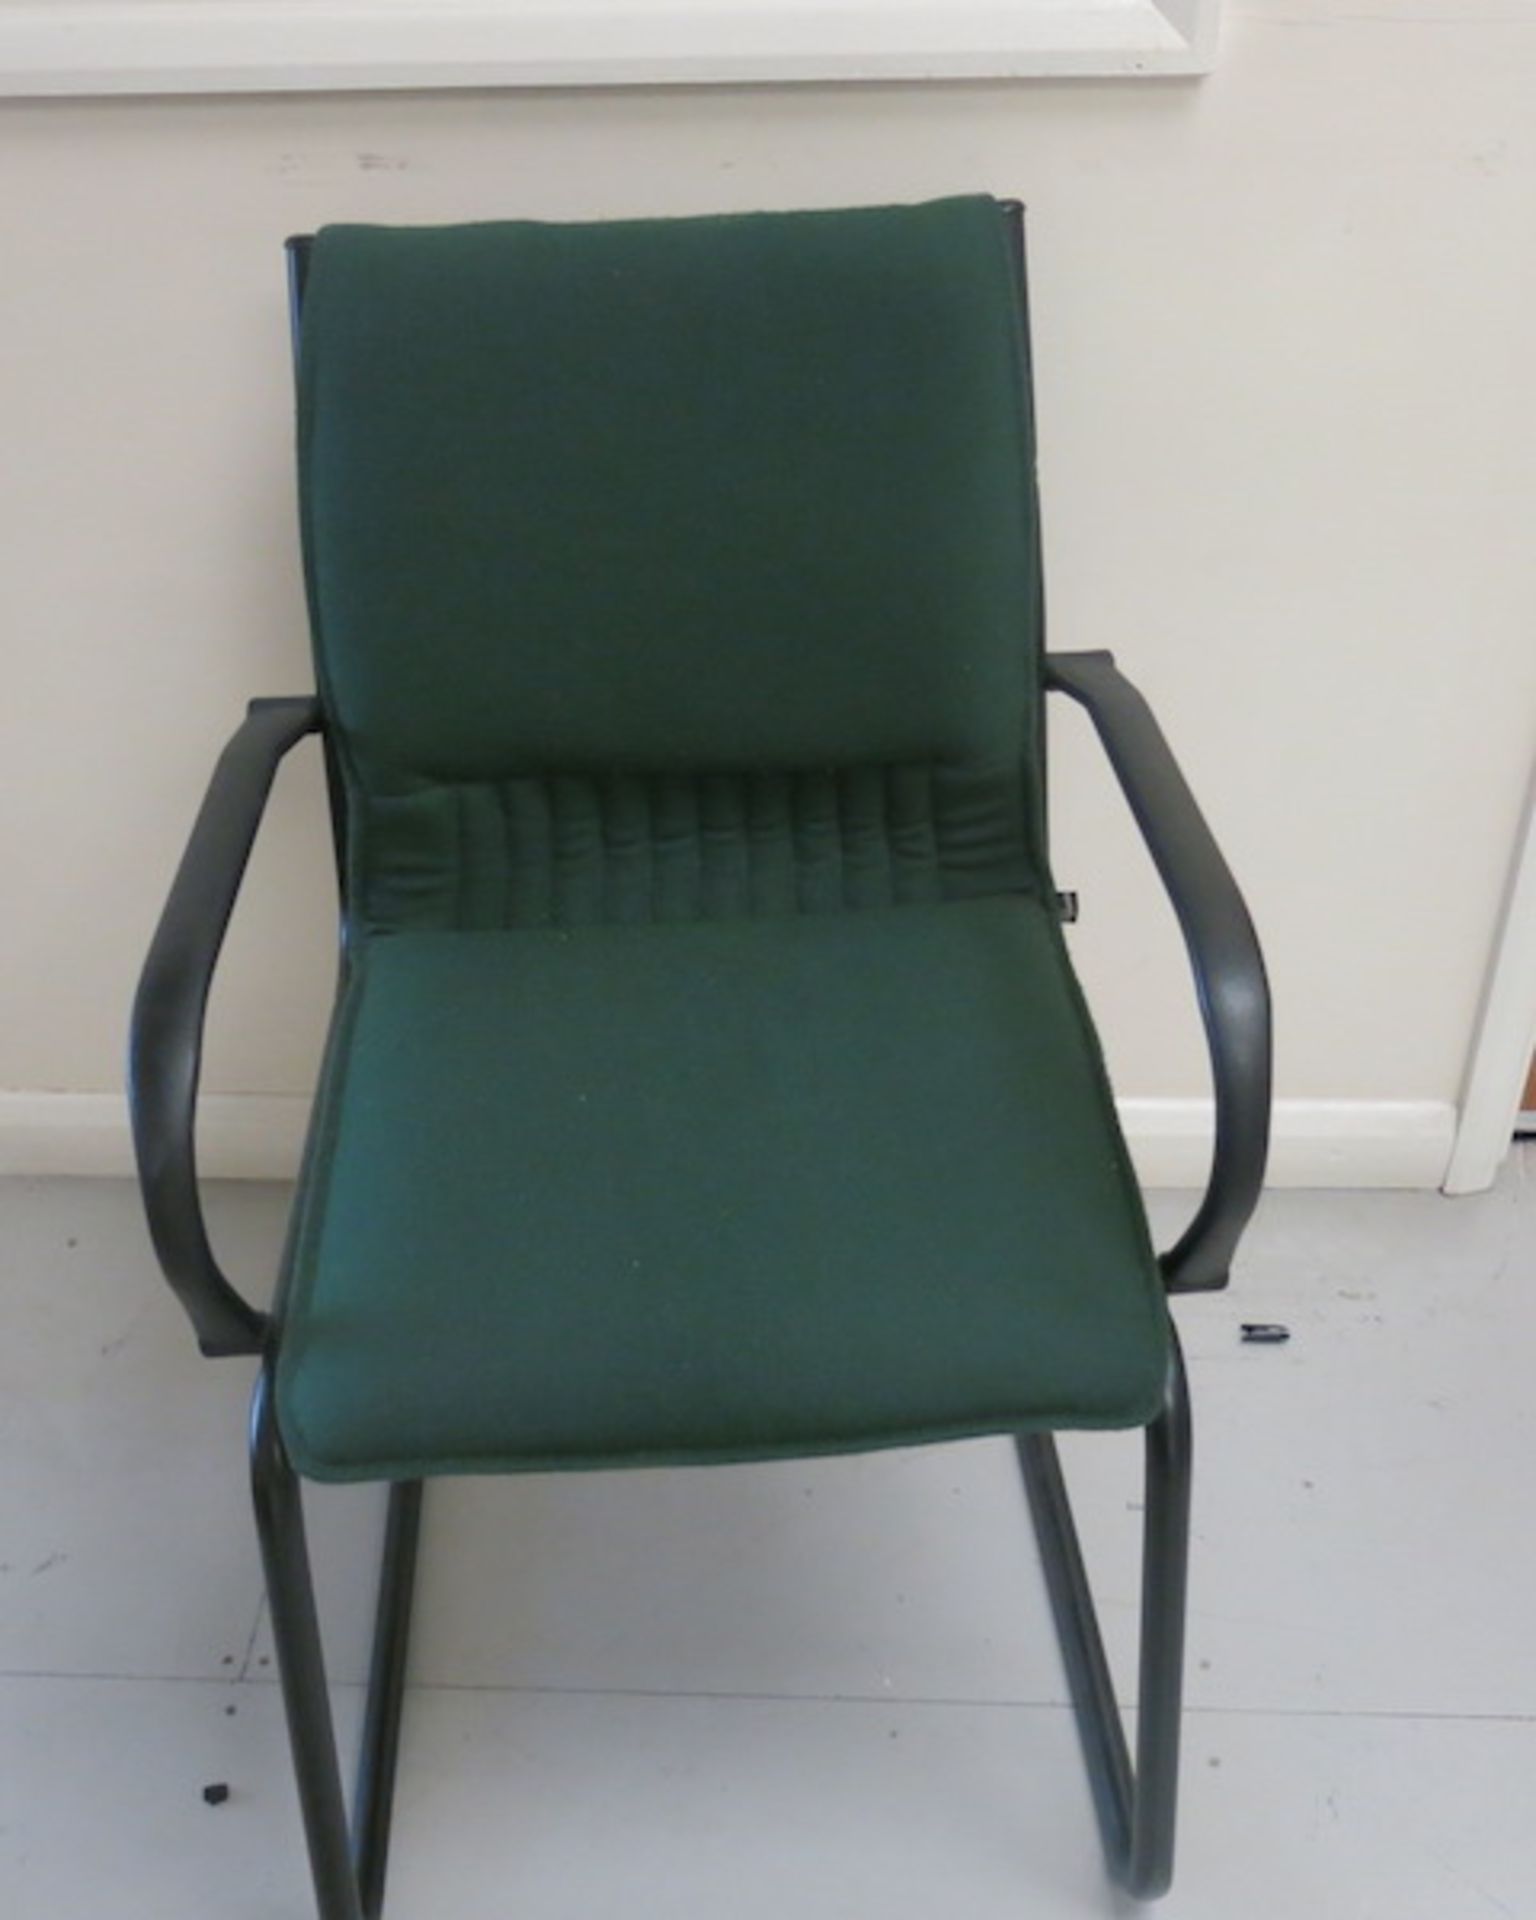 8 x Bottle Green Cantilever Meeting Chairs - Image 3 of 4